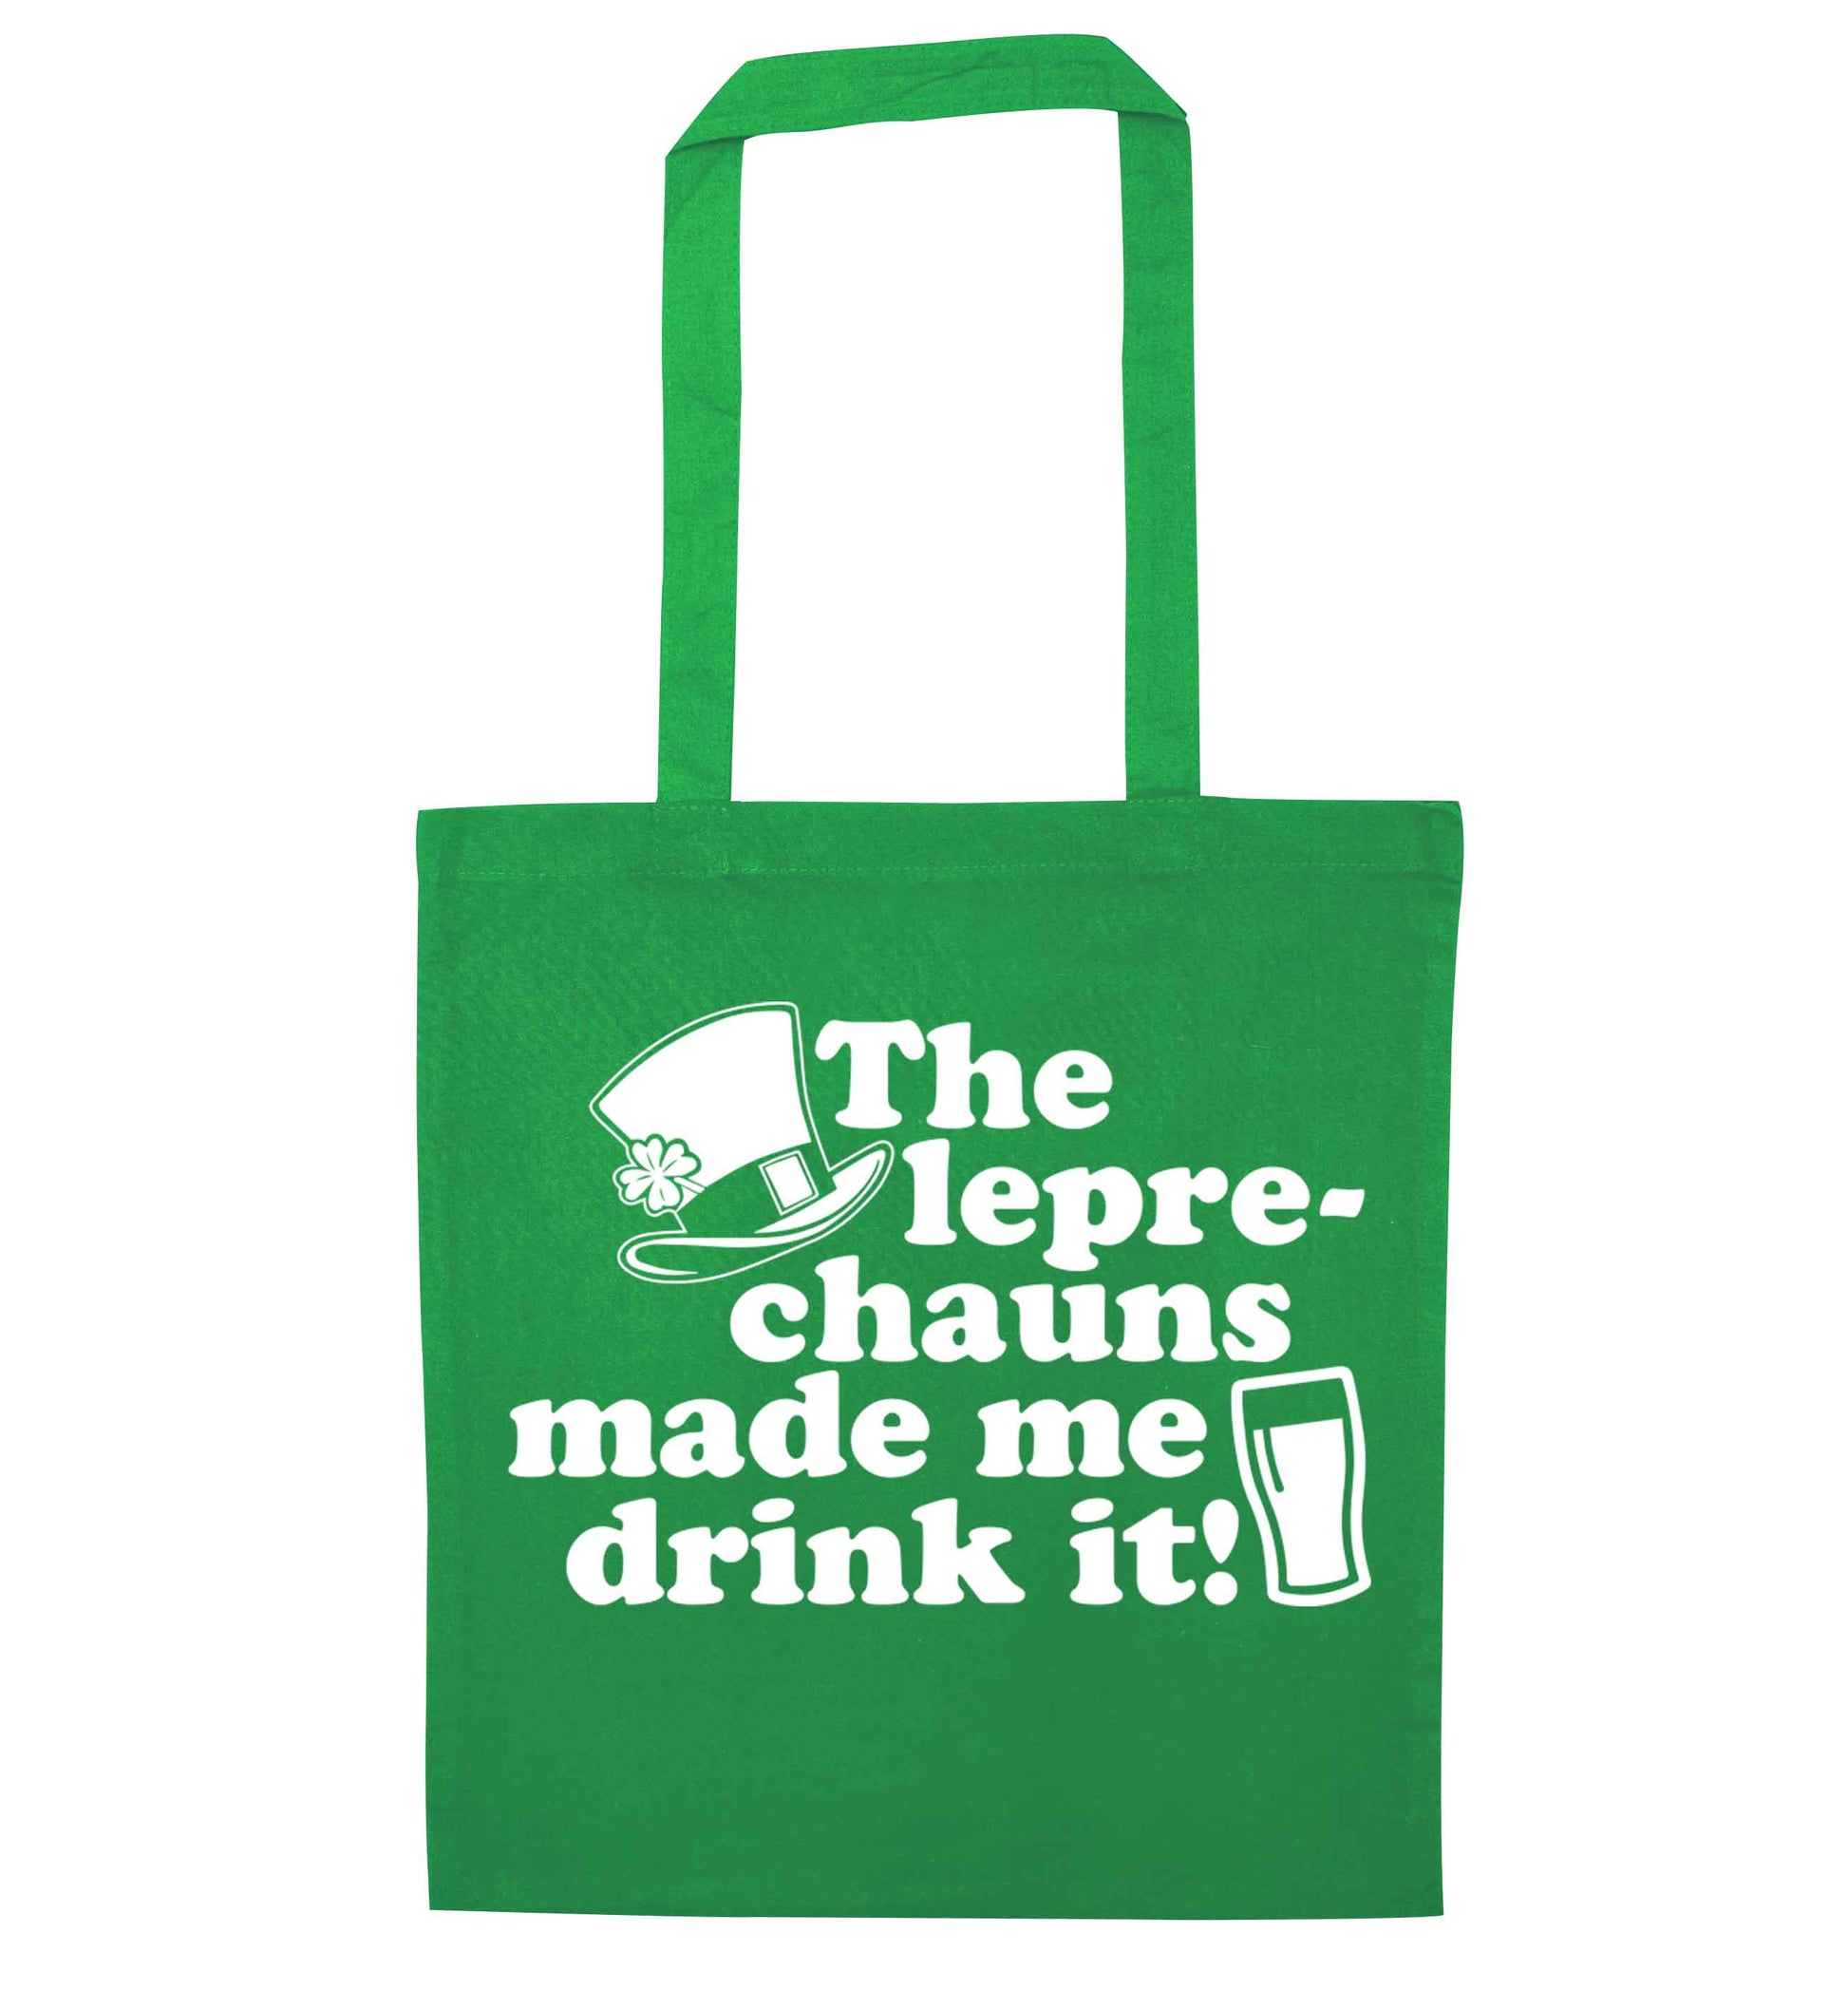 The leprechauns made me drink it green tote bag